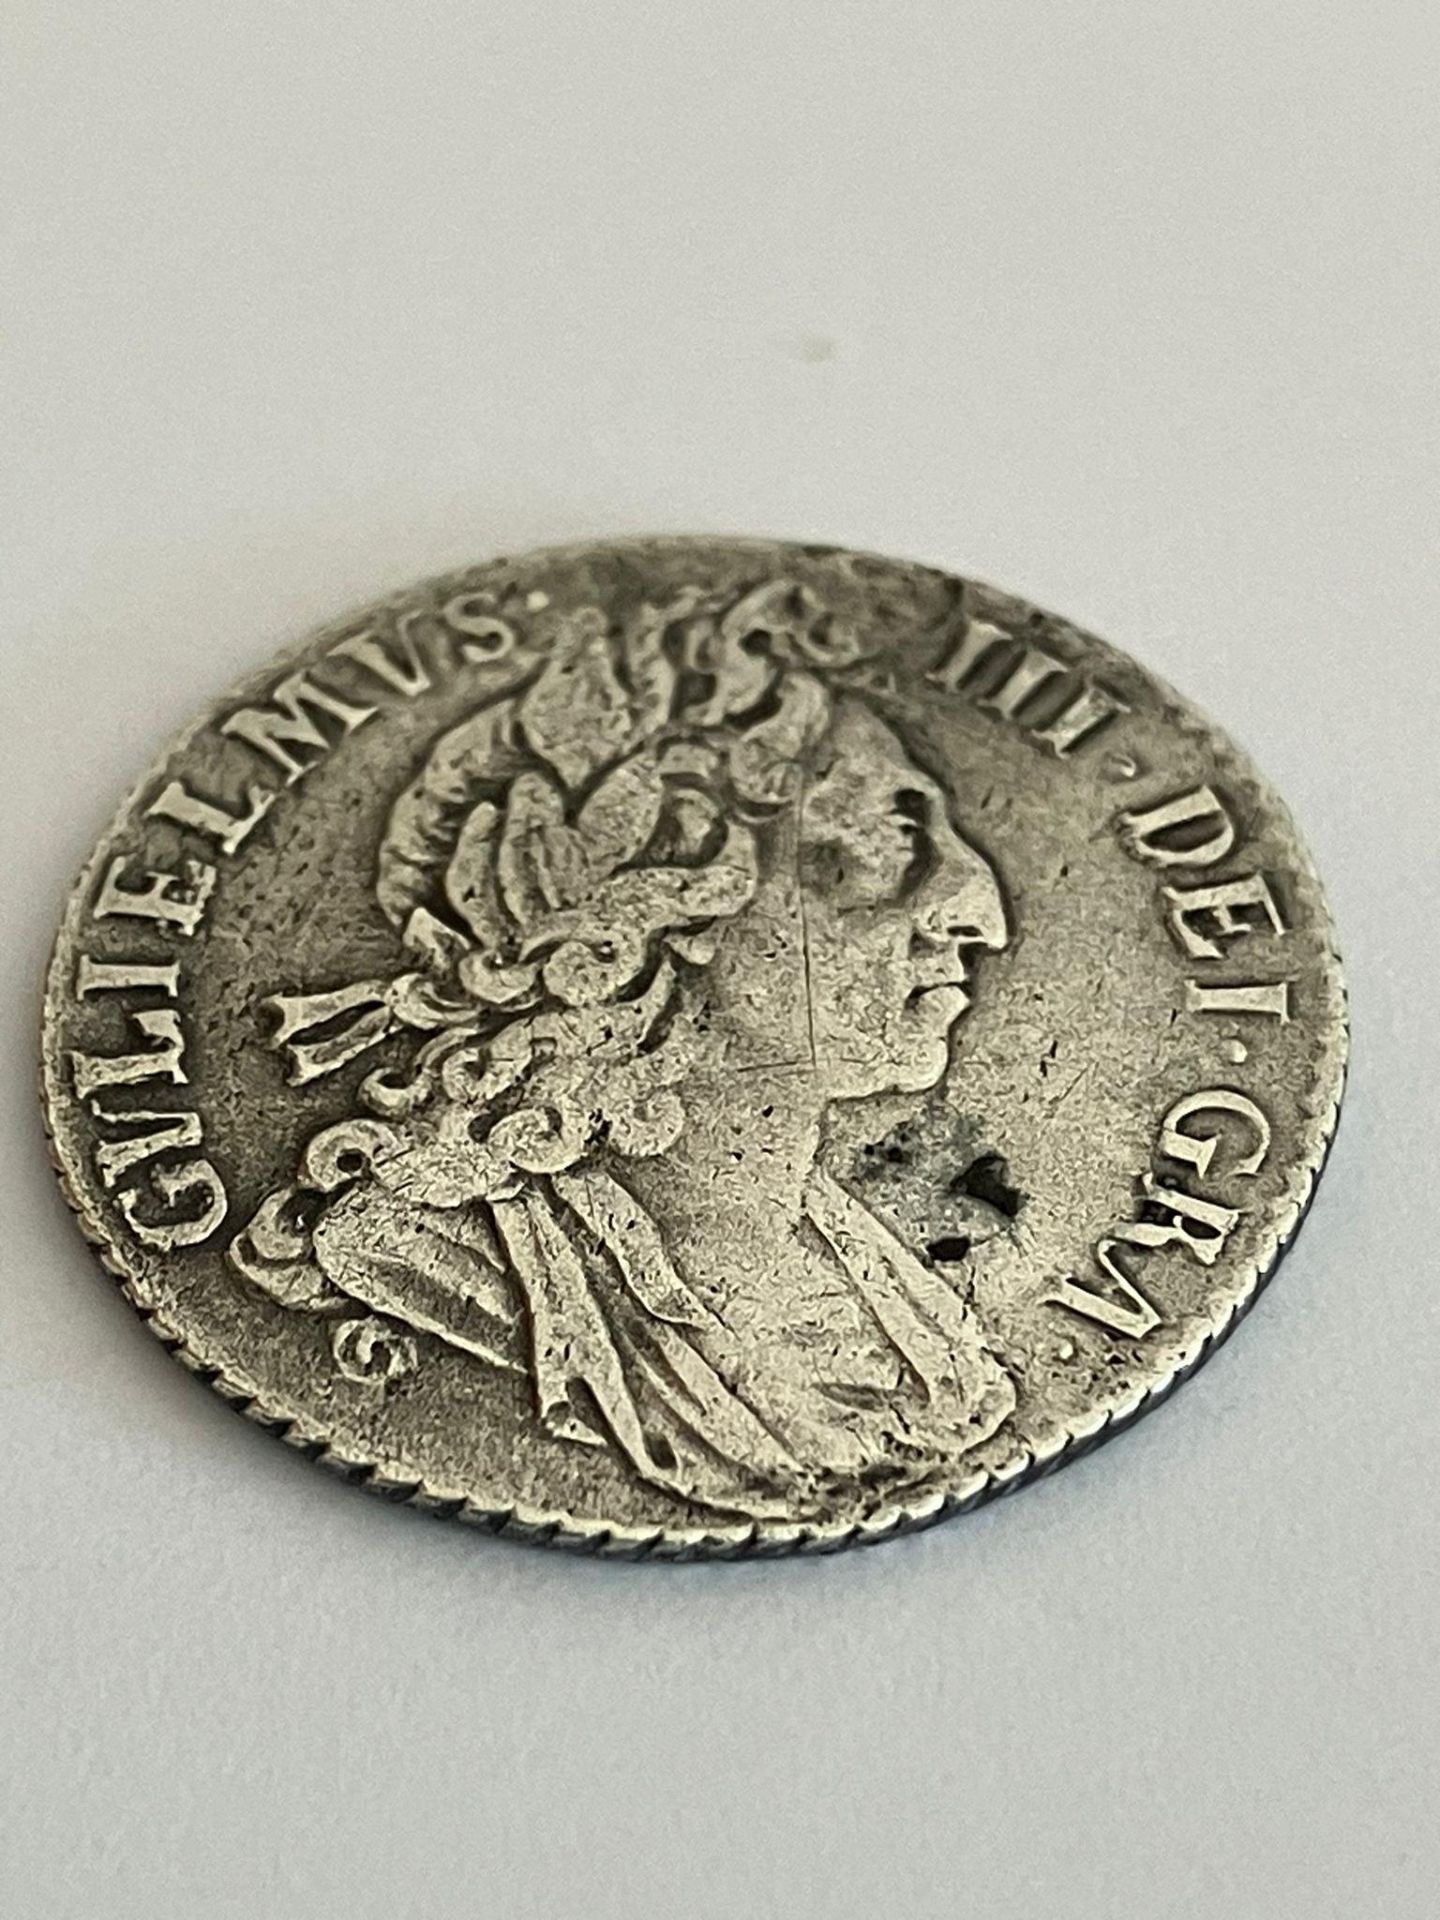 WILLIAM III (William of Orange) 1697 SILVER SIXPENCE. Very fine condition, having clear detail to - Image 2 of 2